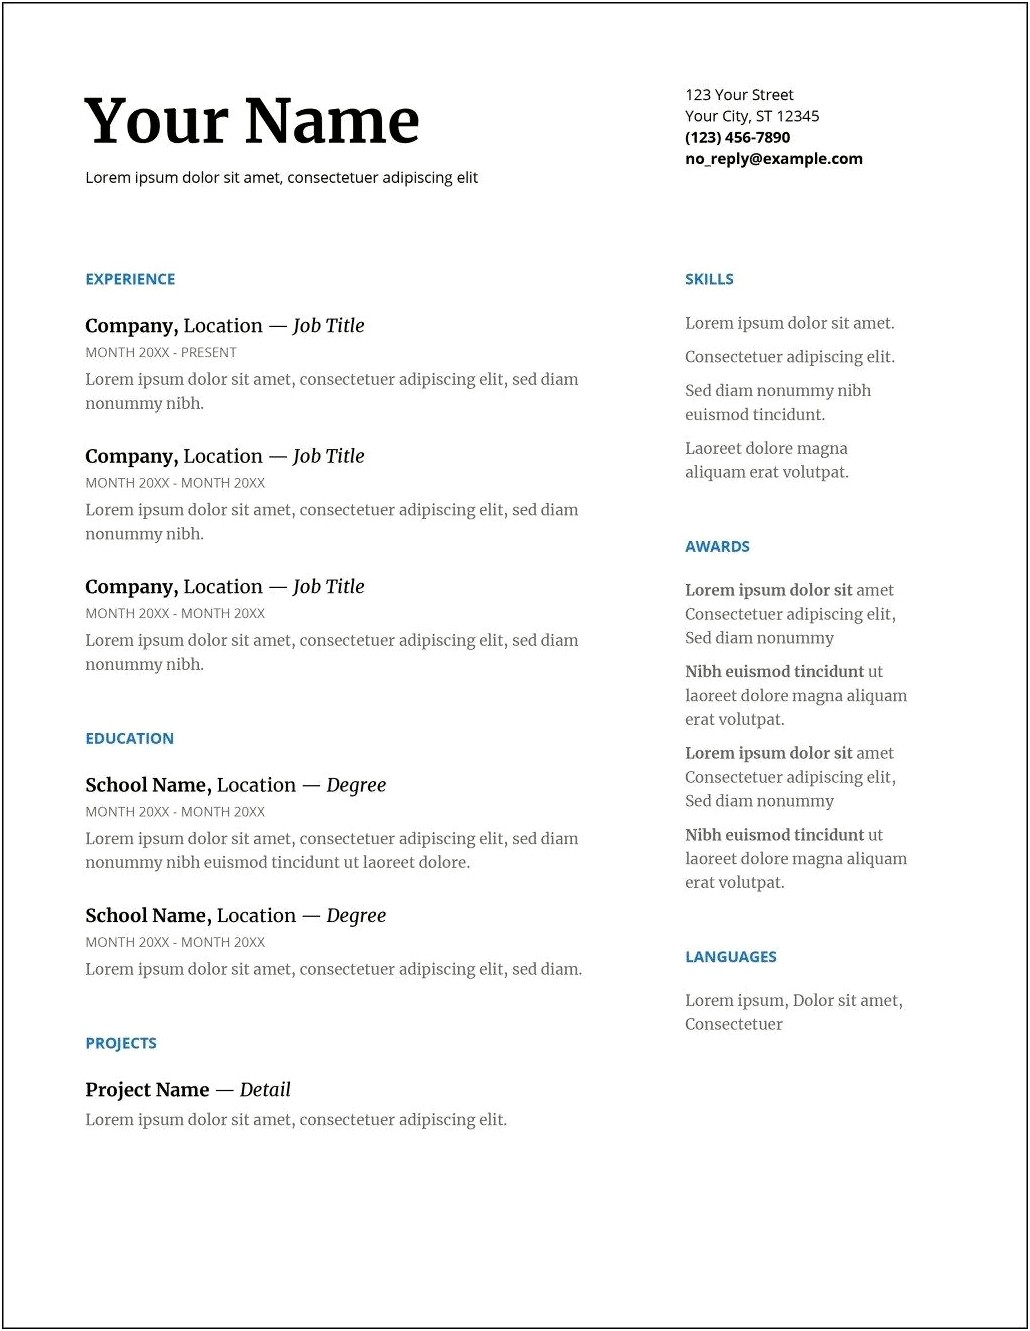 Resume Template In Microsoft Office Word 2007